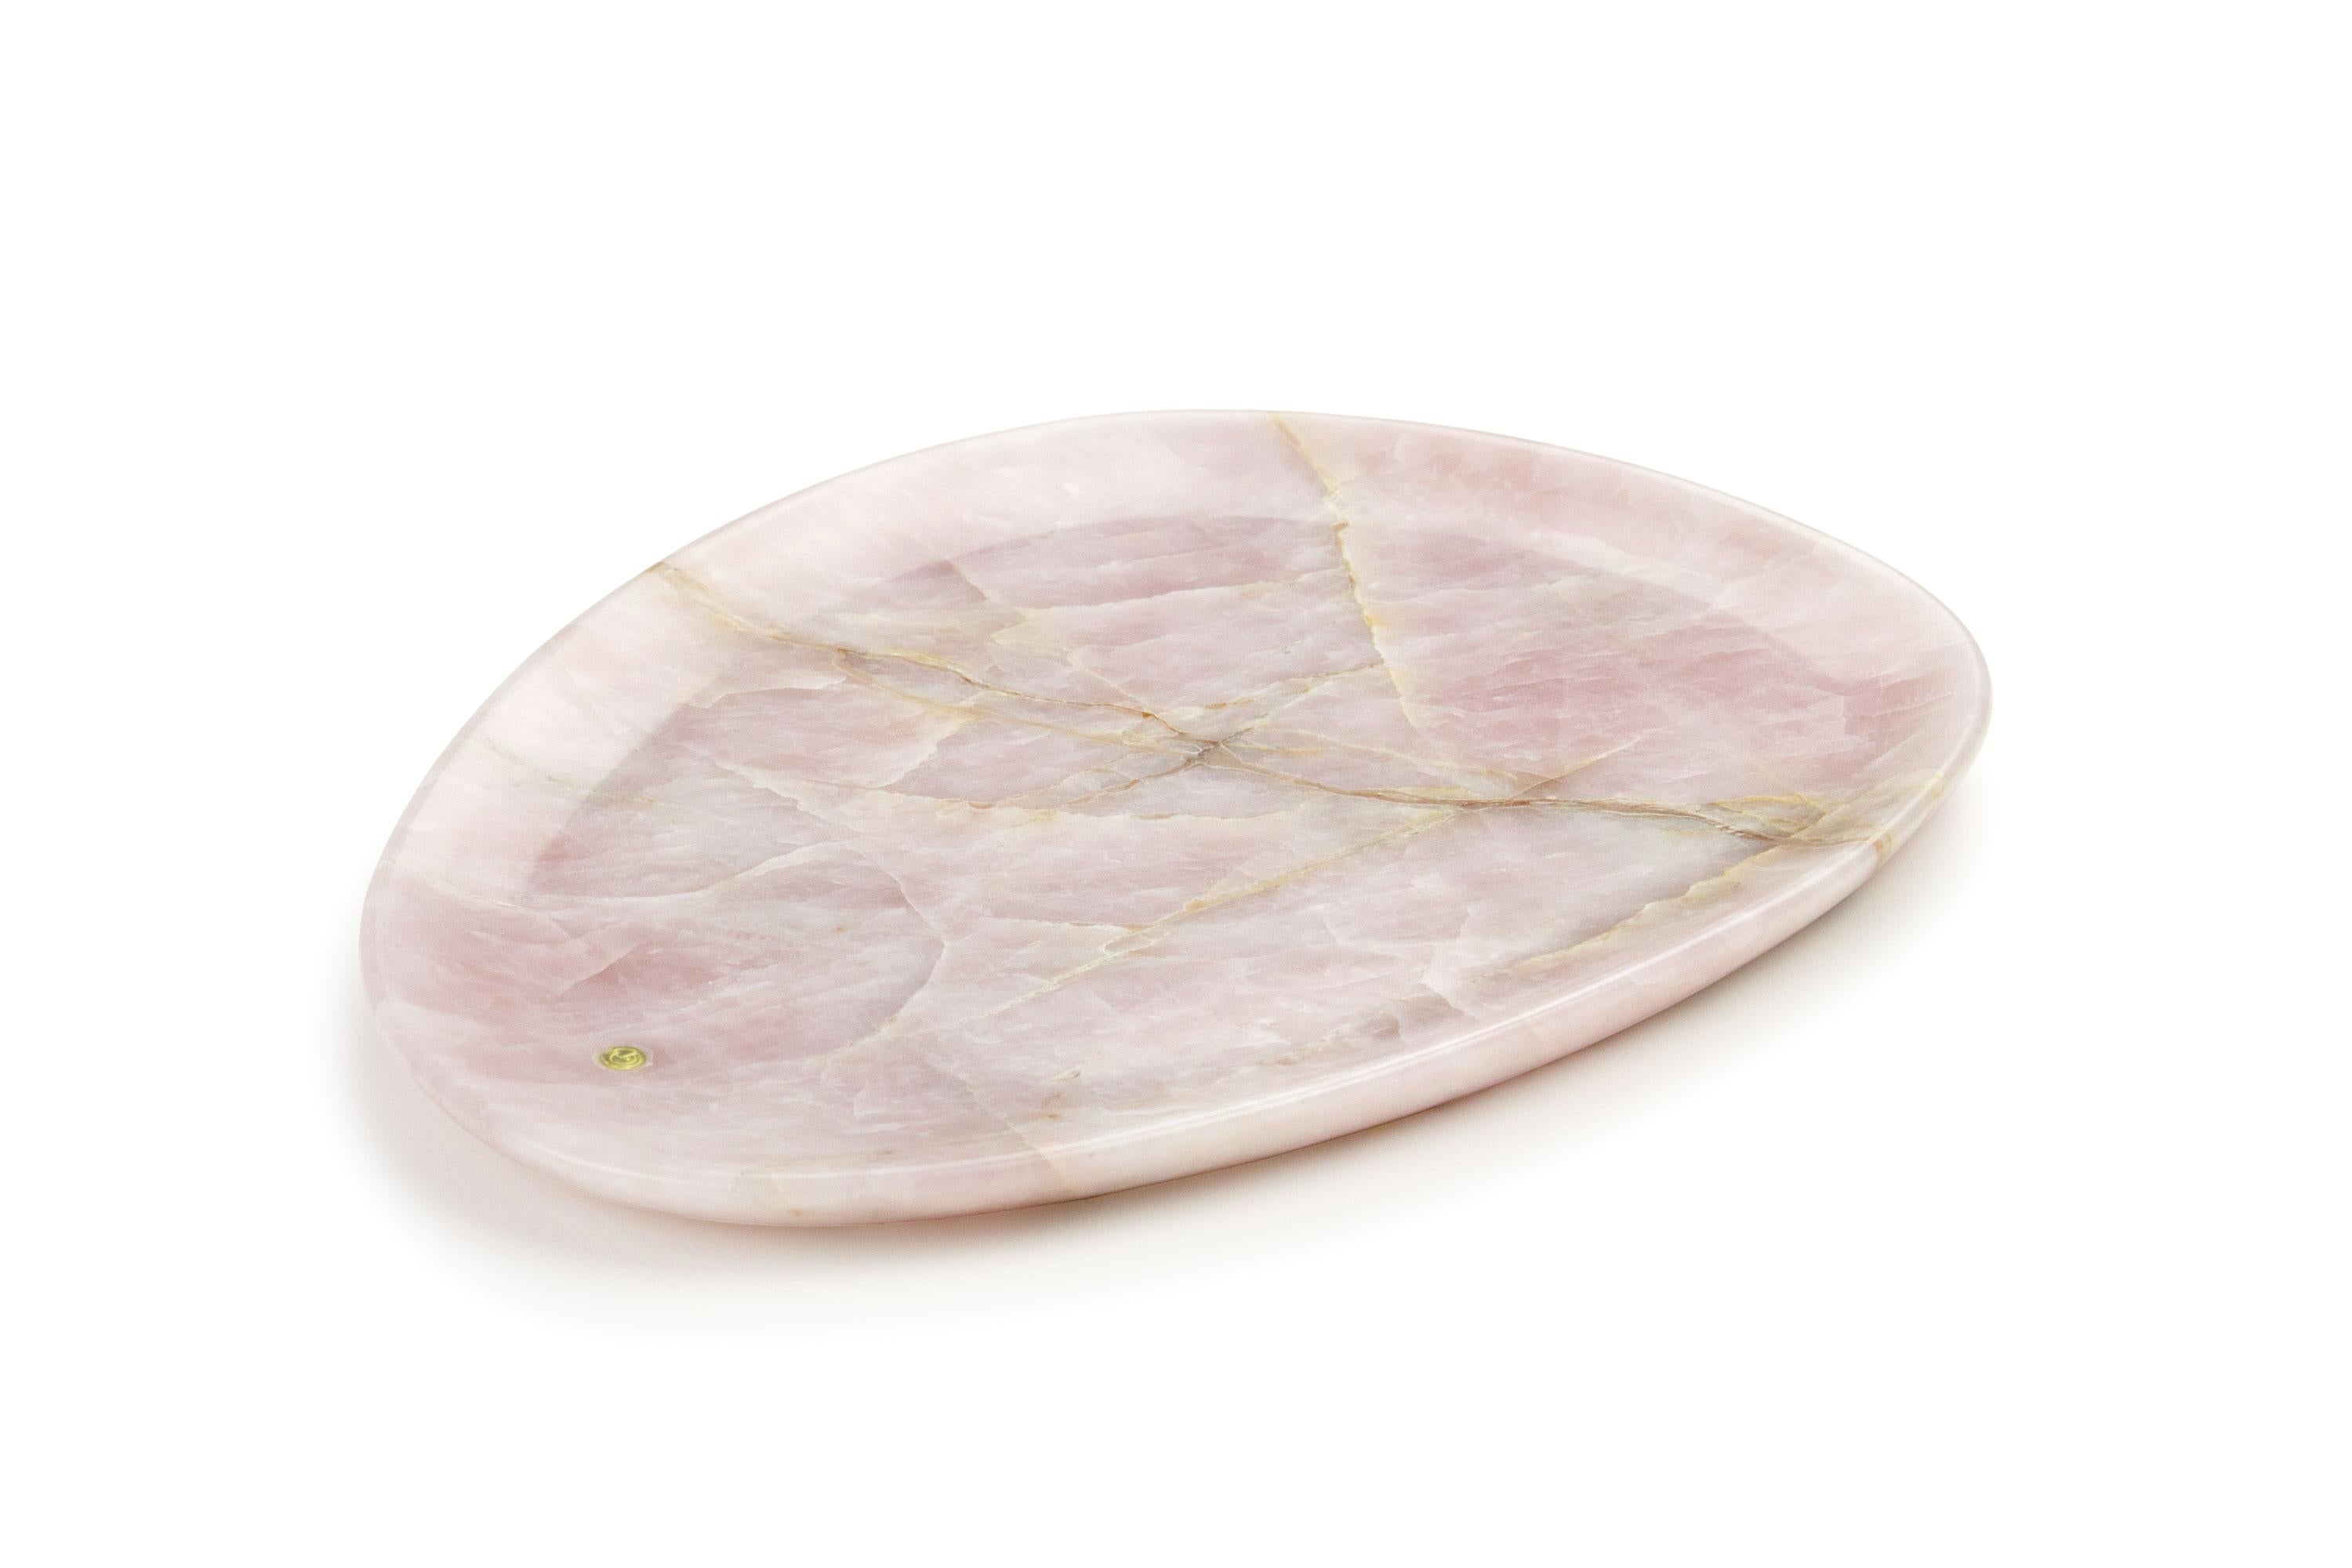 Hand carved presentation plate from precious Rose Quartz.
Multiple use as plates, platters and placers. 

Dimensions: Medium L 30, W 28, H 1.8 cm, also available: Big L 36, W 35, H 1.8 cm, small L 24, W 20, H 1.8 cm.
Available in different marbles,